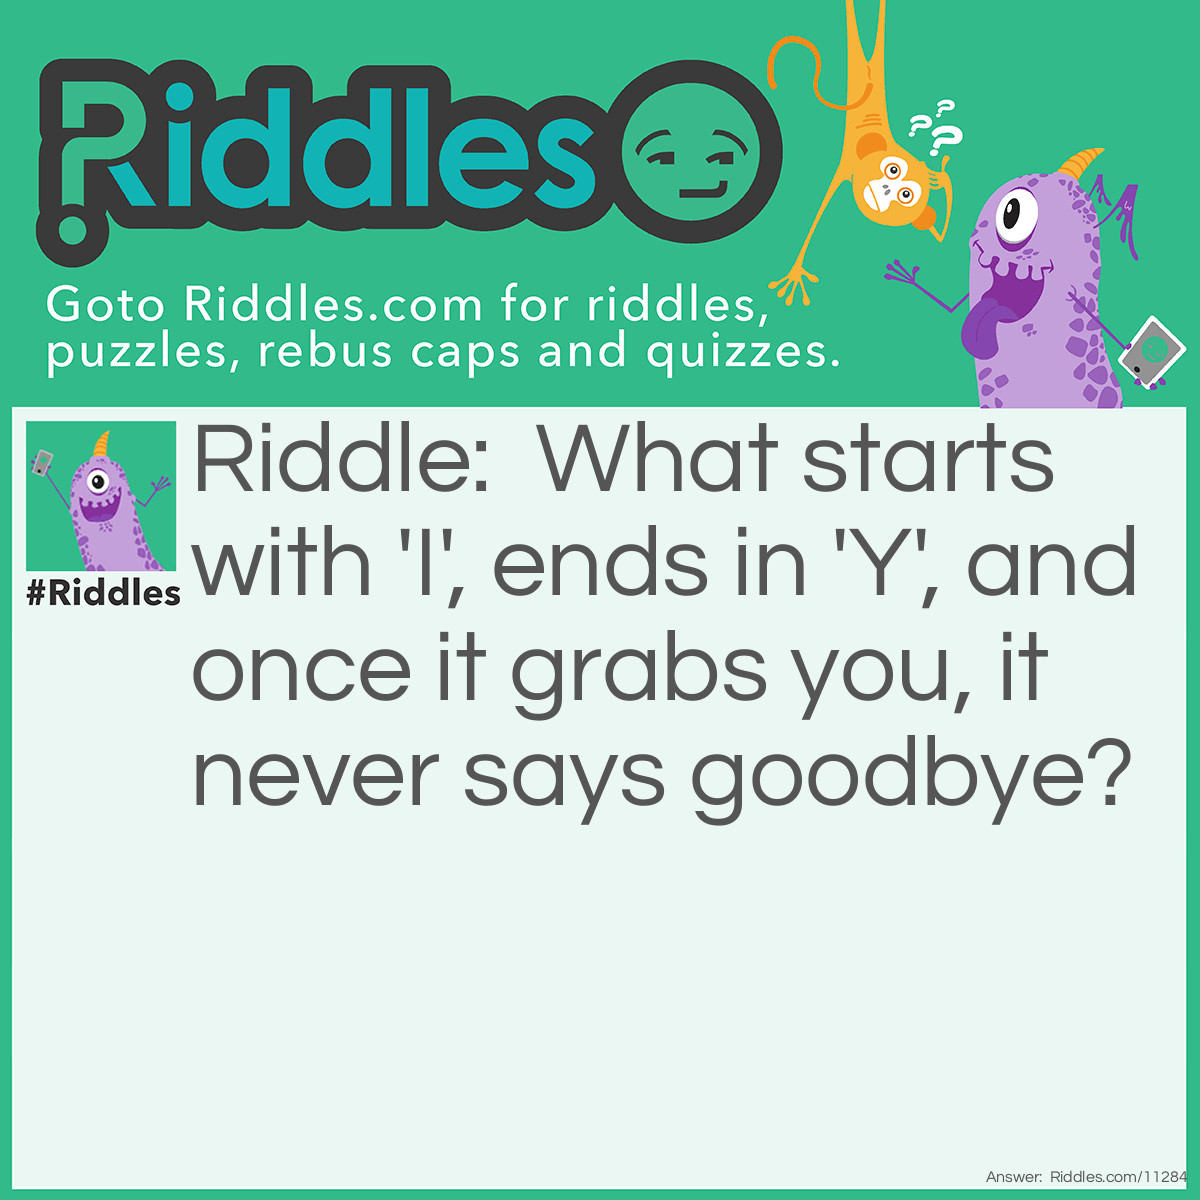 Riddle: What starts with 'I', ends in 'Y', and once it grabs you, it never says goodbye? Answer: Insanity.